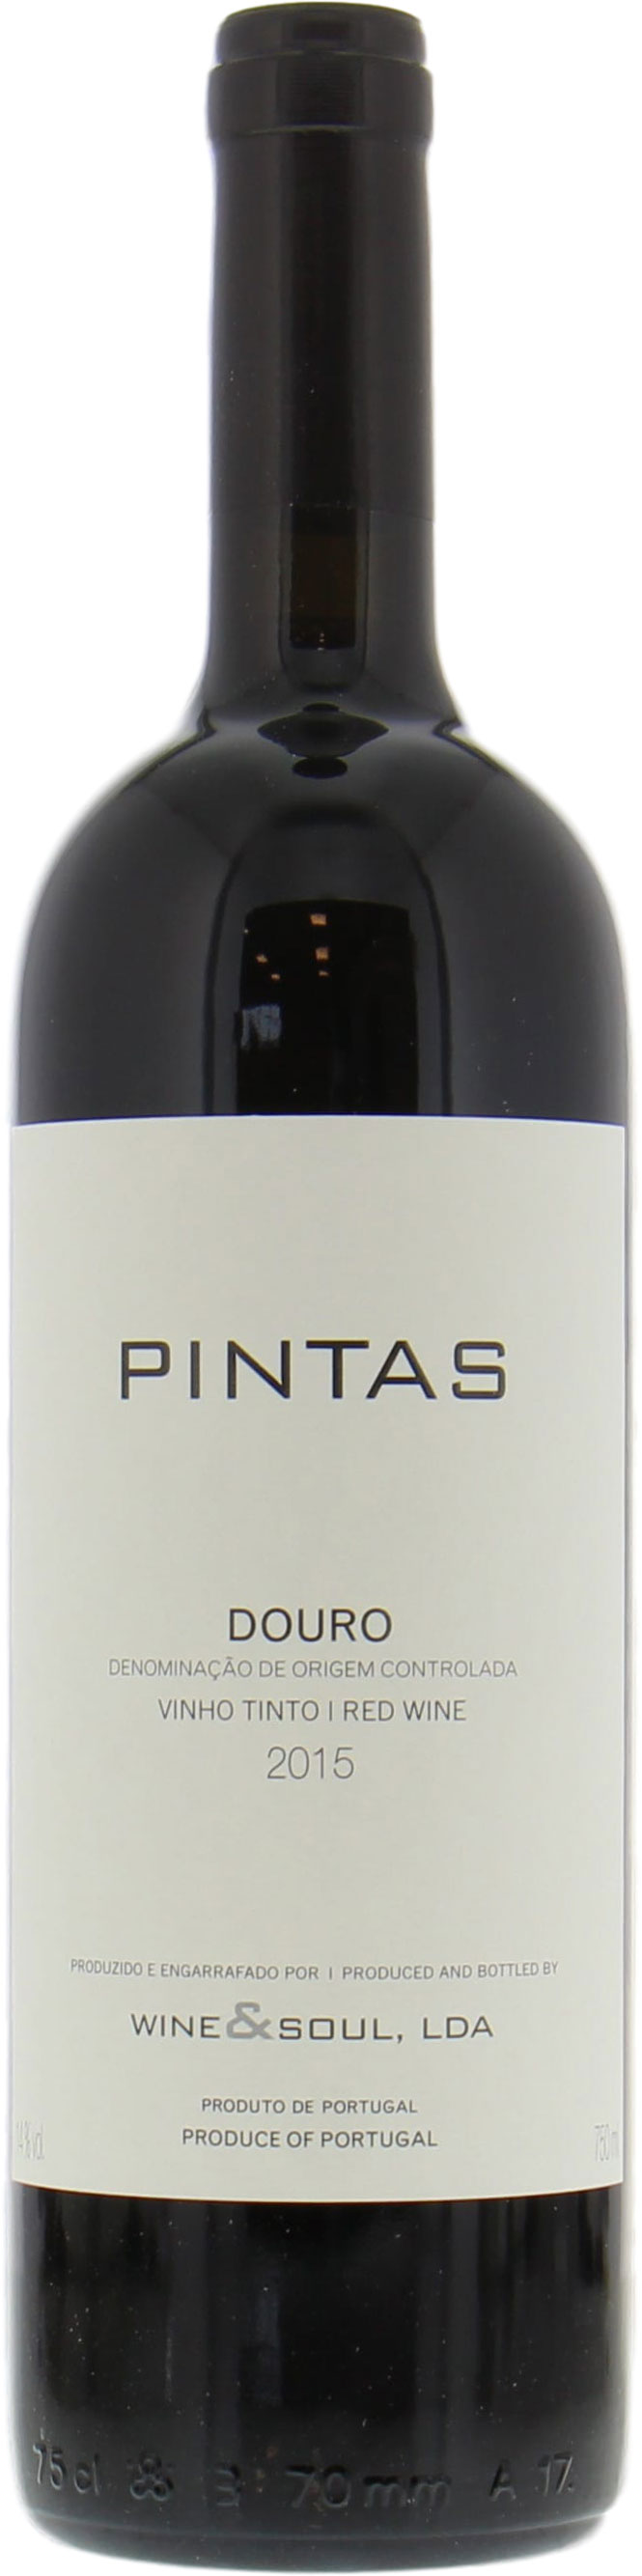 Wine & Soul - Pintas Tinto 2015 From Original Wooden Case